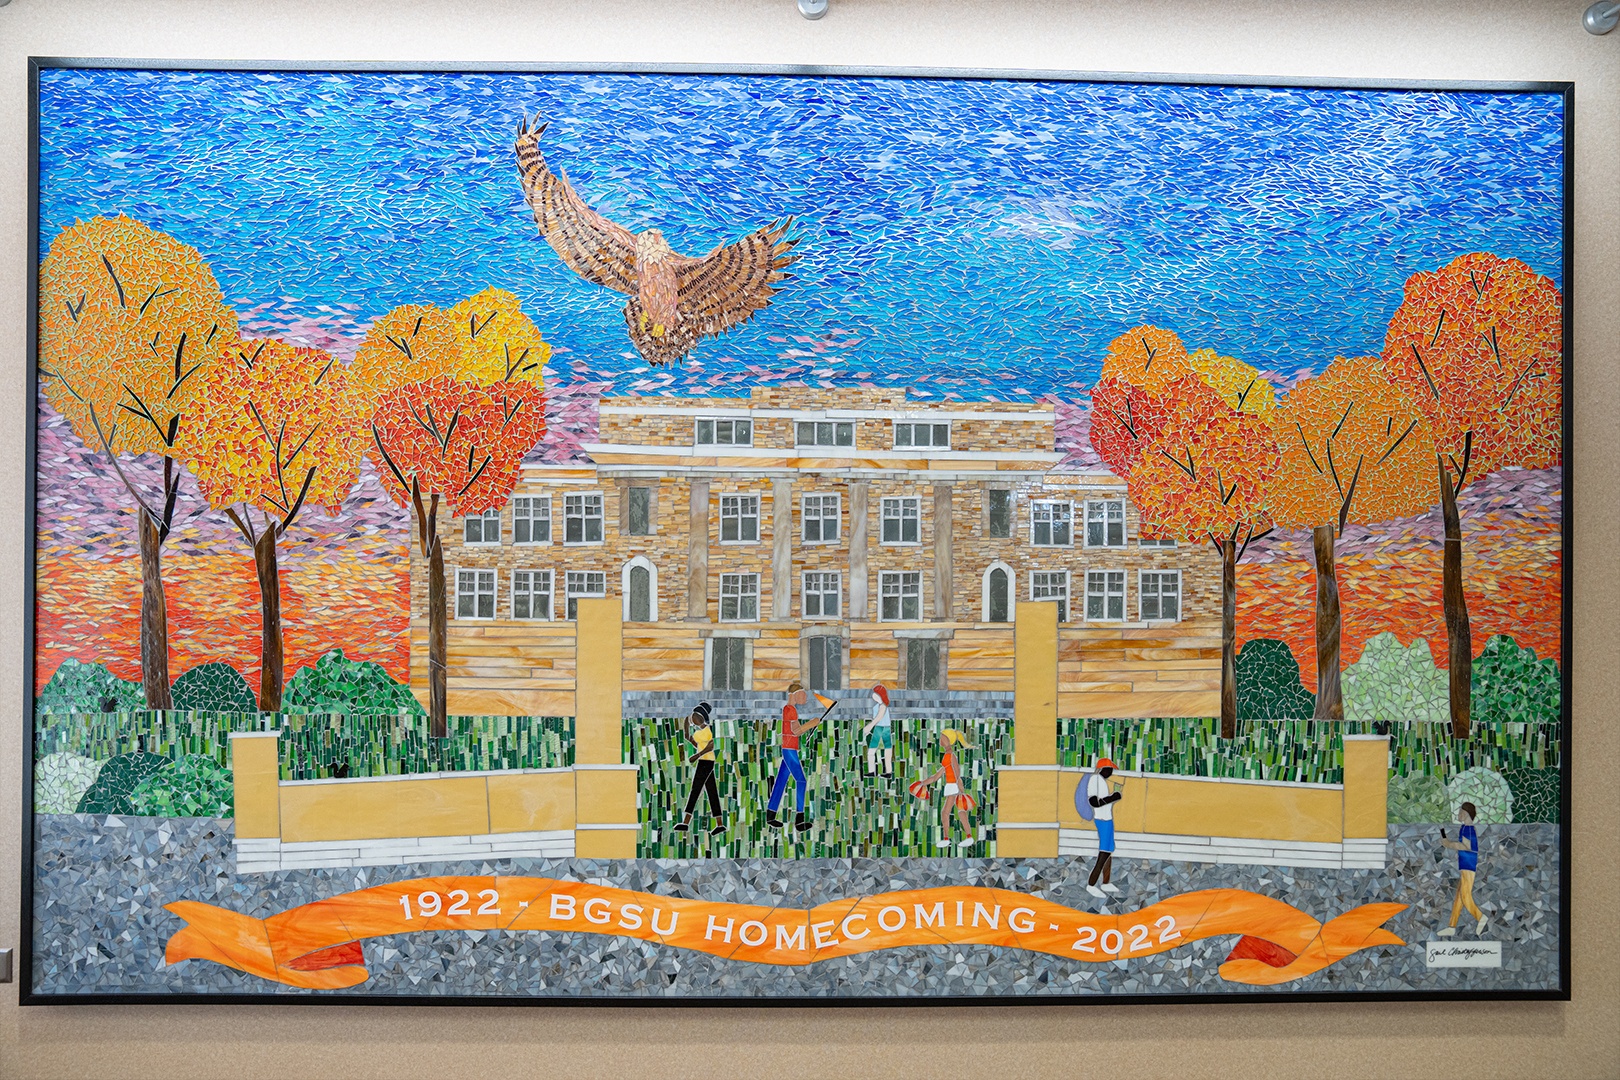 100th BGSU Homecoming mosaic shows University Hall, the Alumni Gateway, students walking, trees and a falcon flying above it all